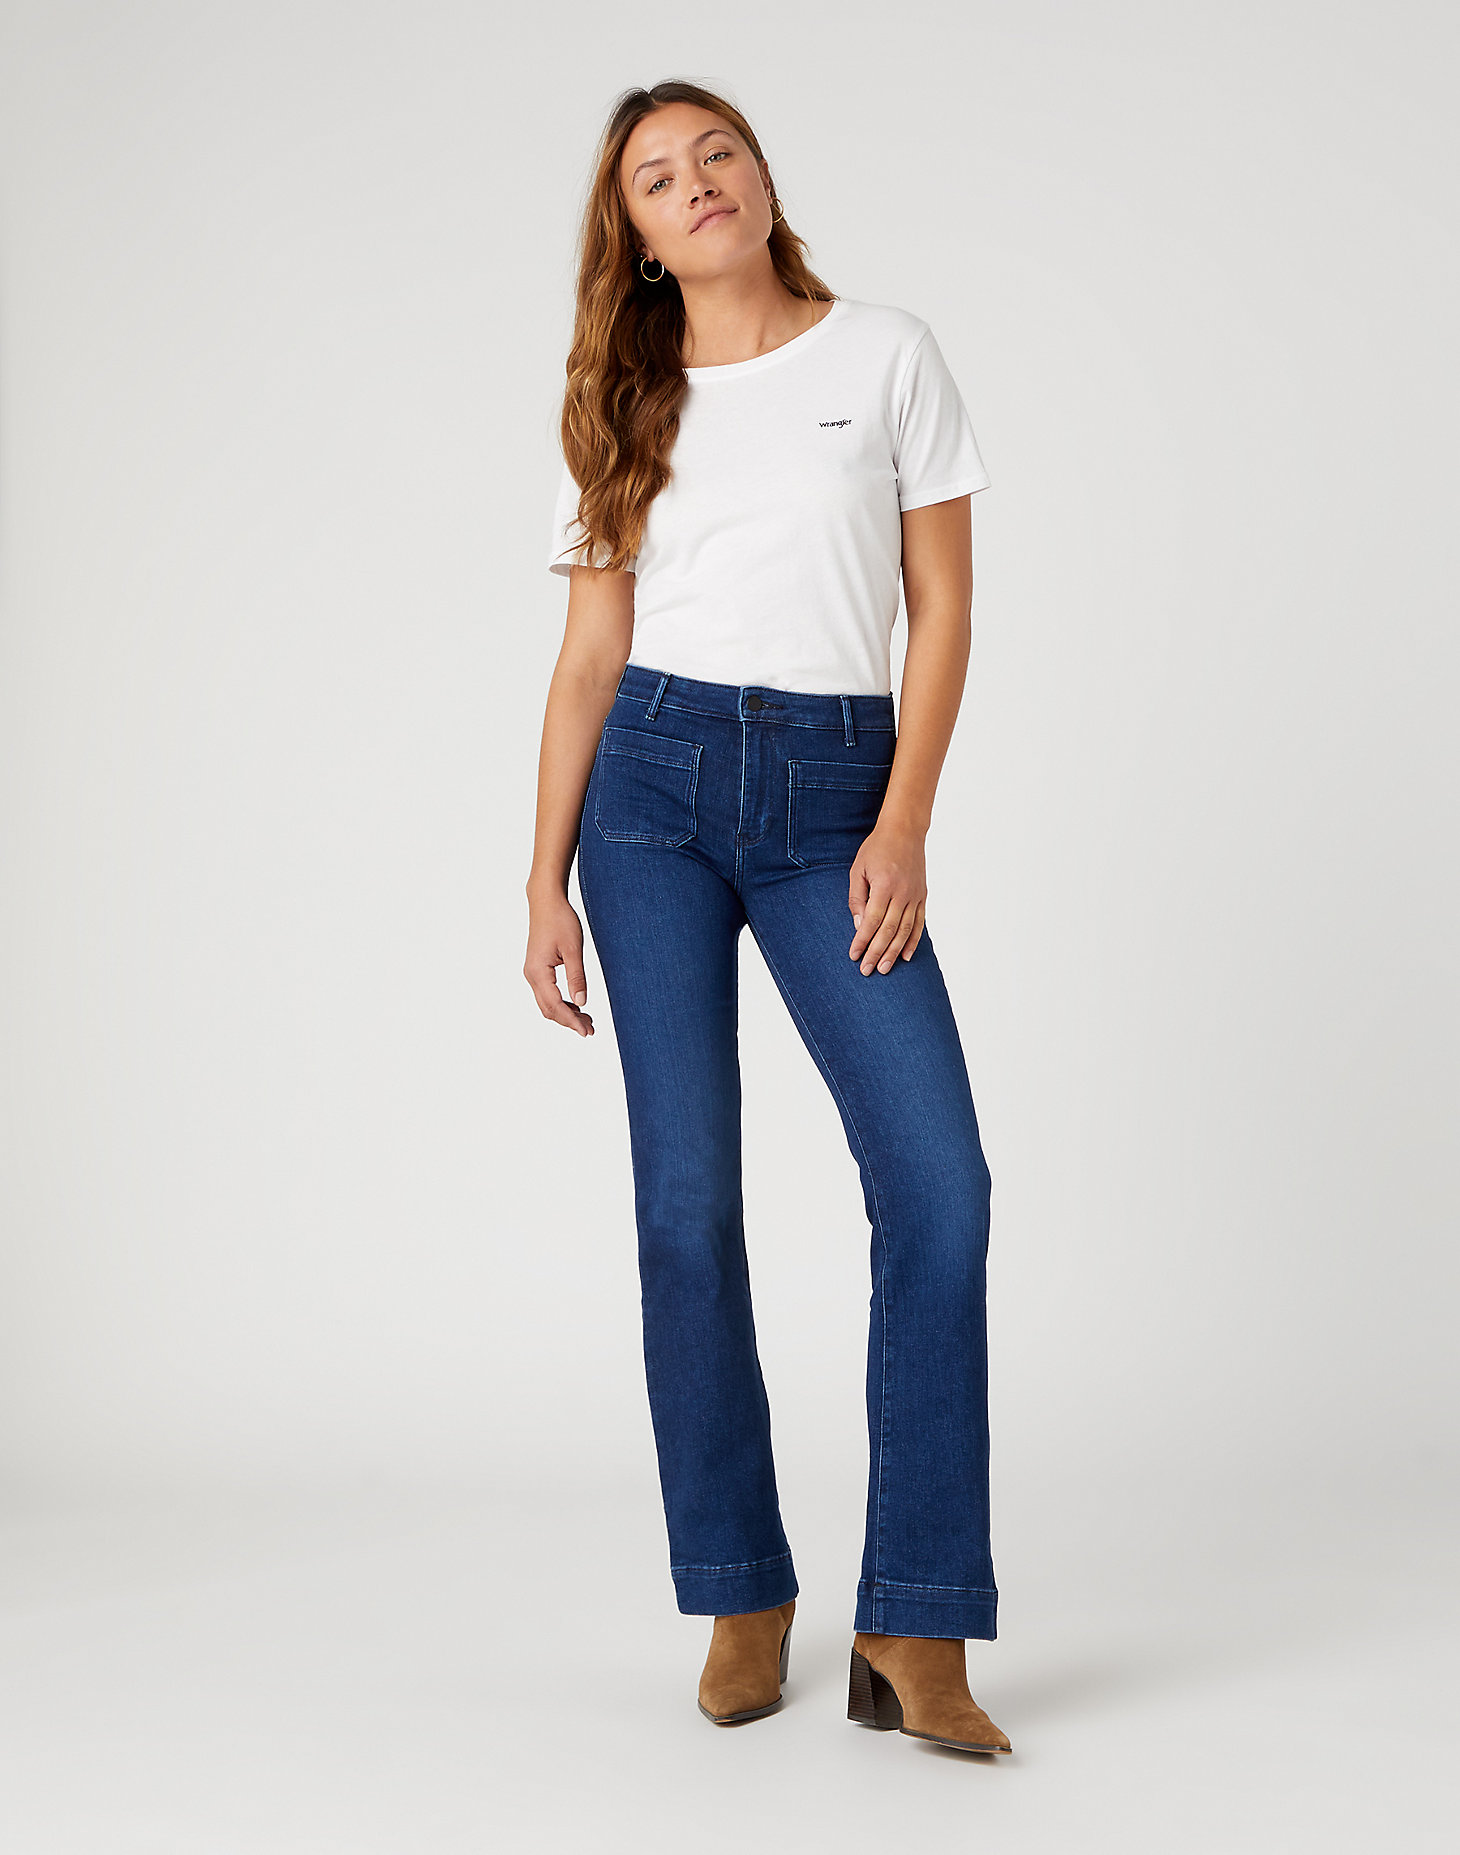 Flare Jeans in Blue Love alternative view 1